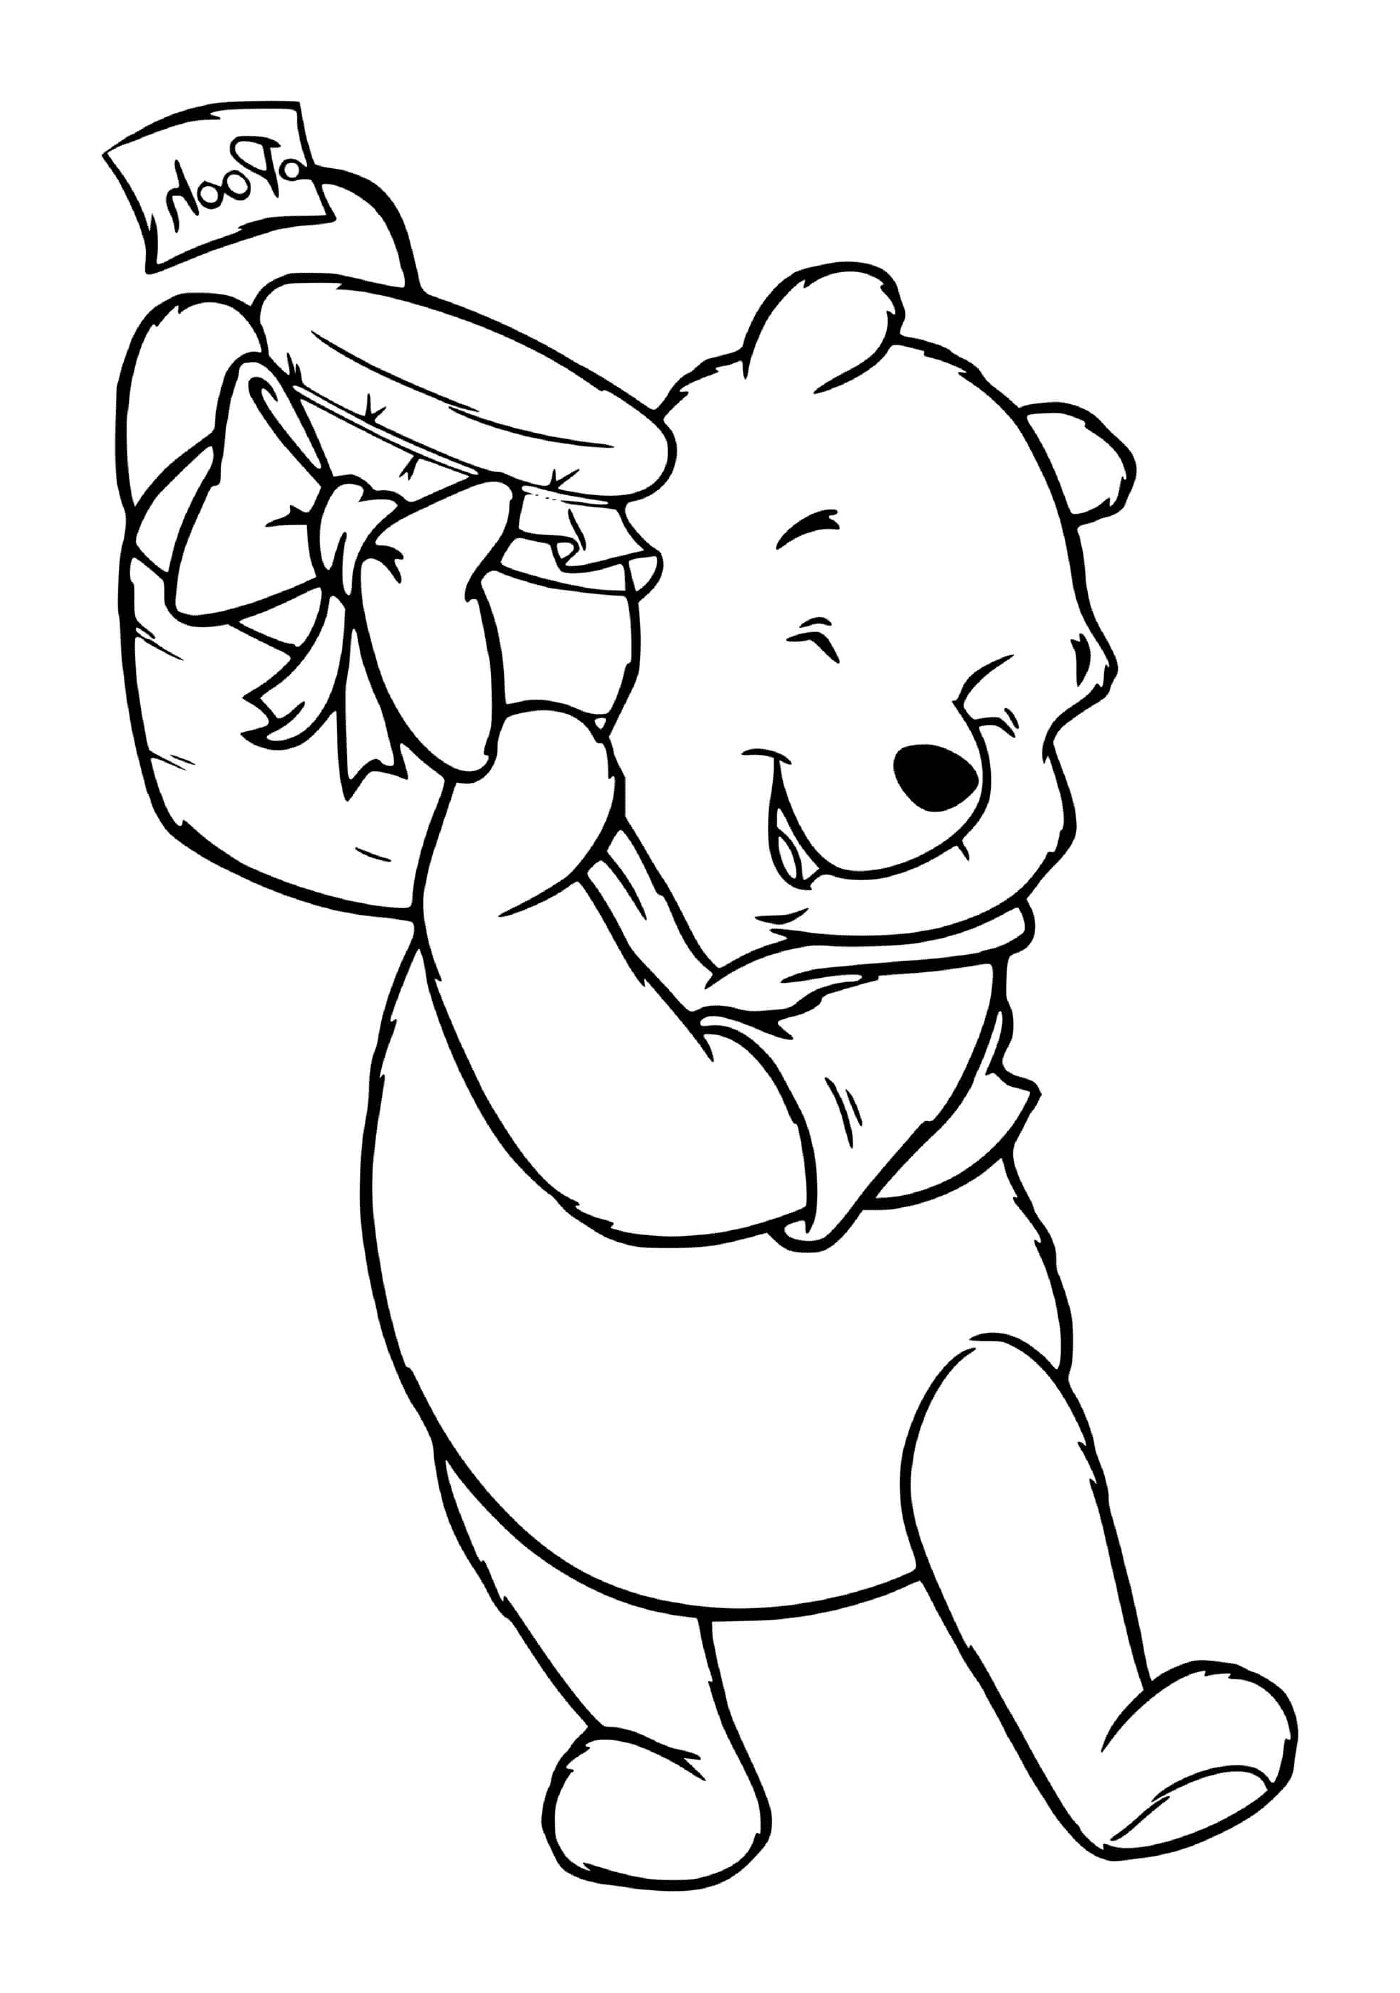  Winnie the bear with a gift 